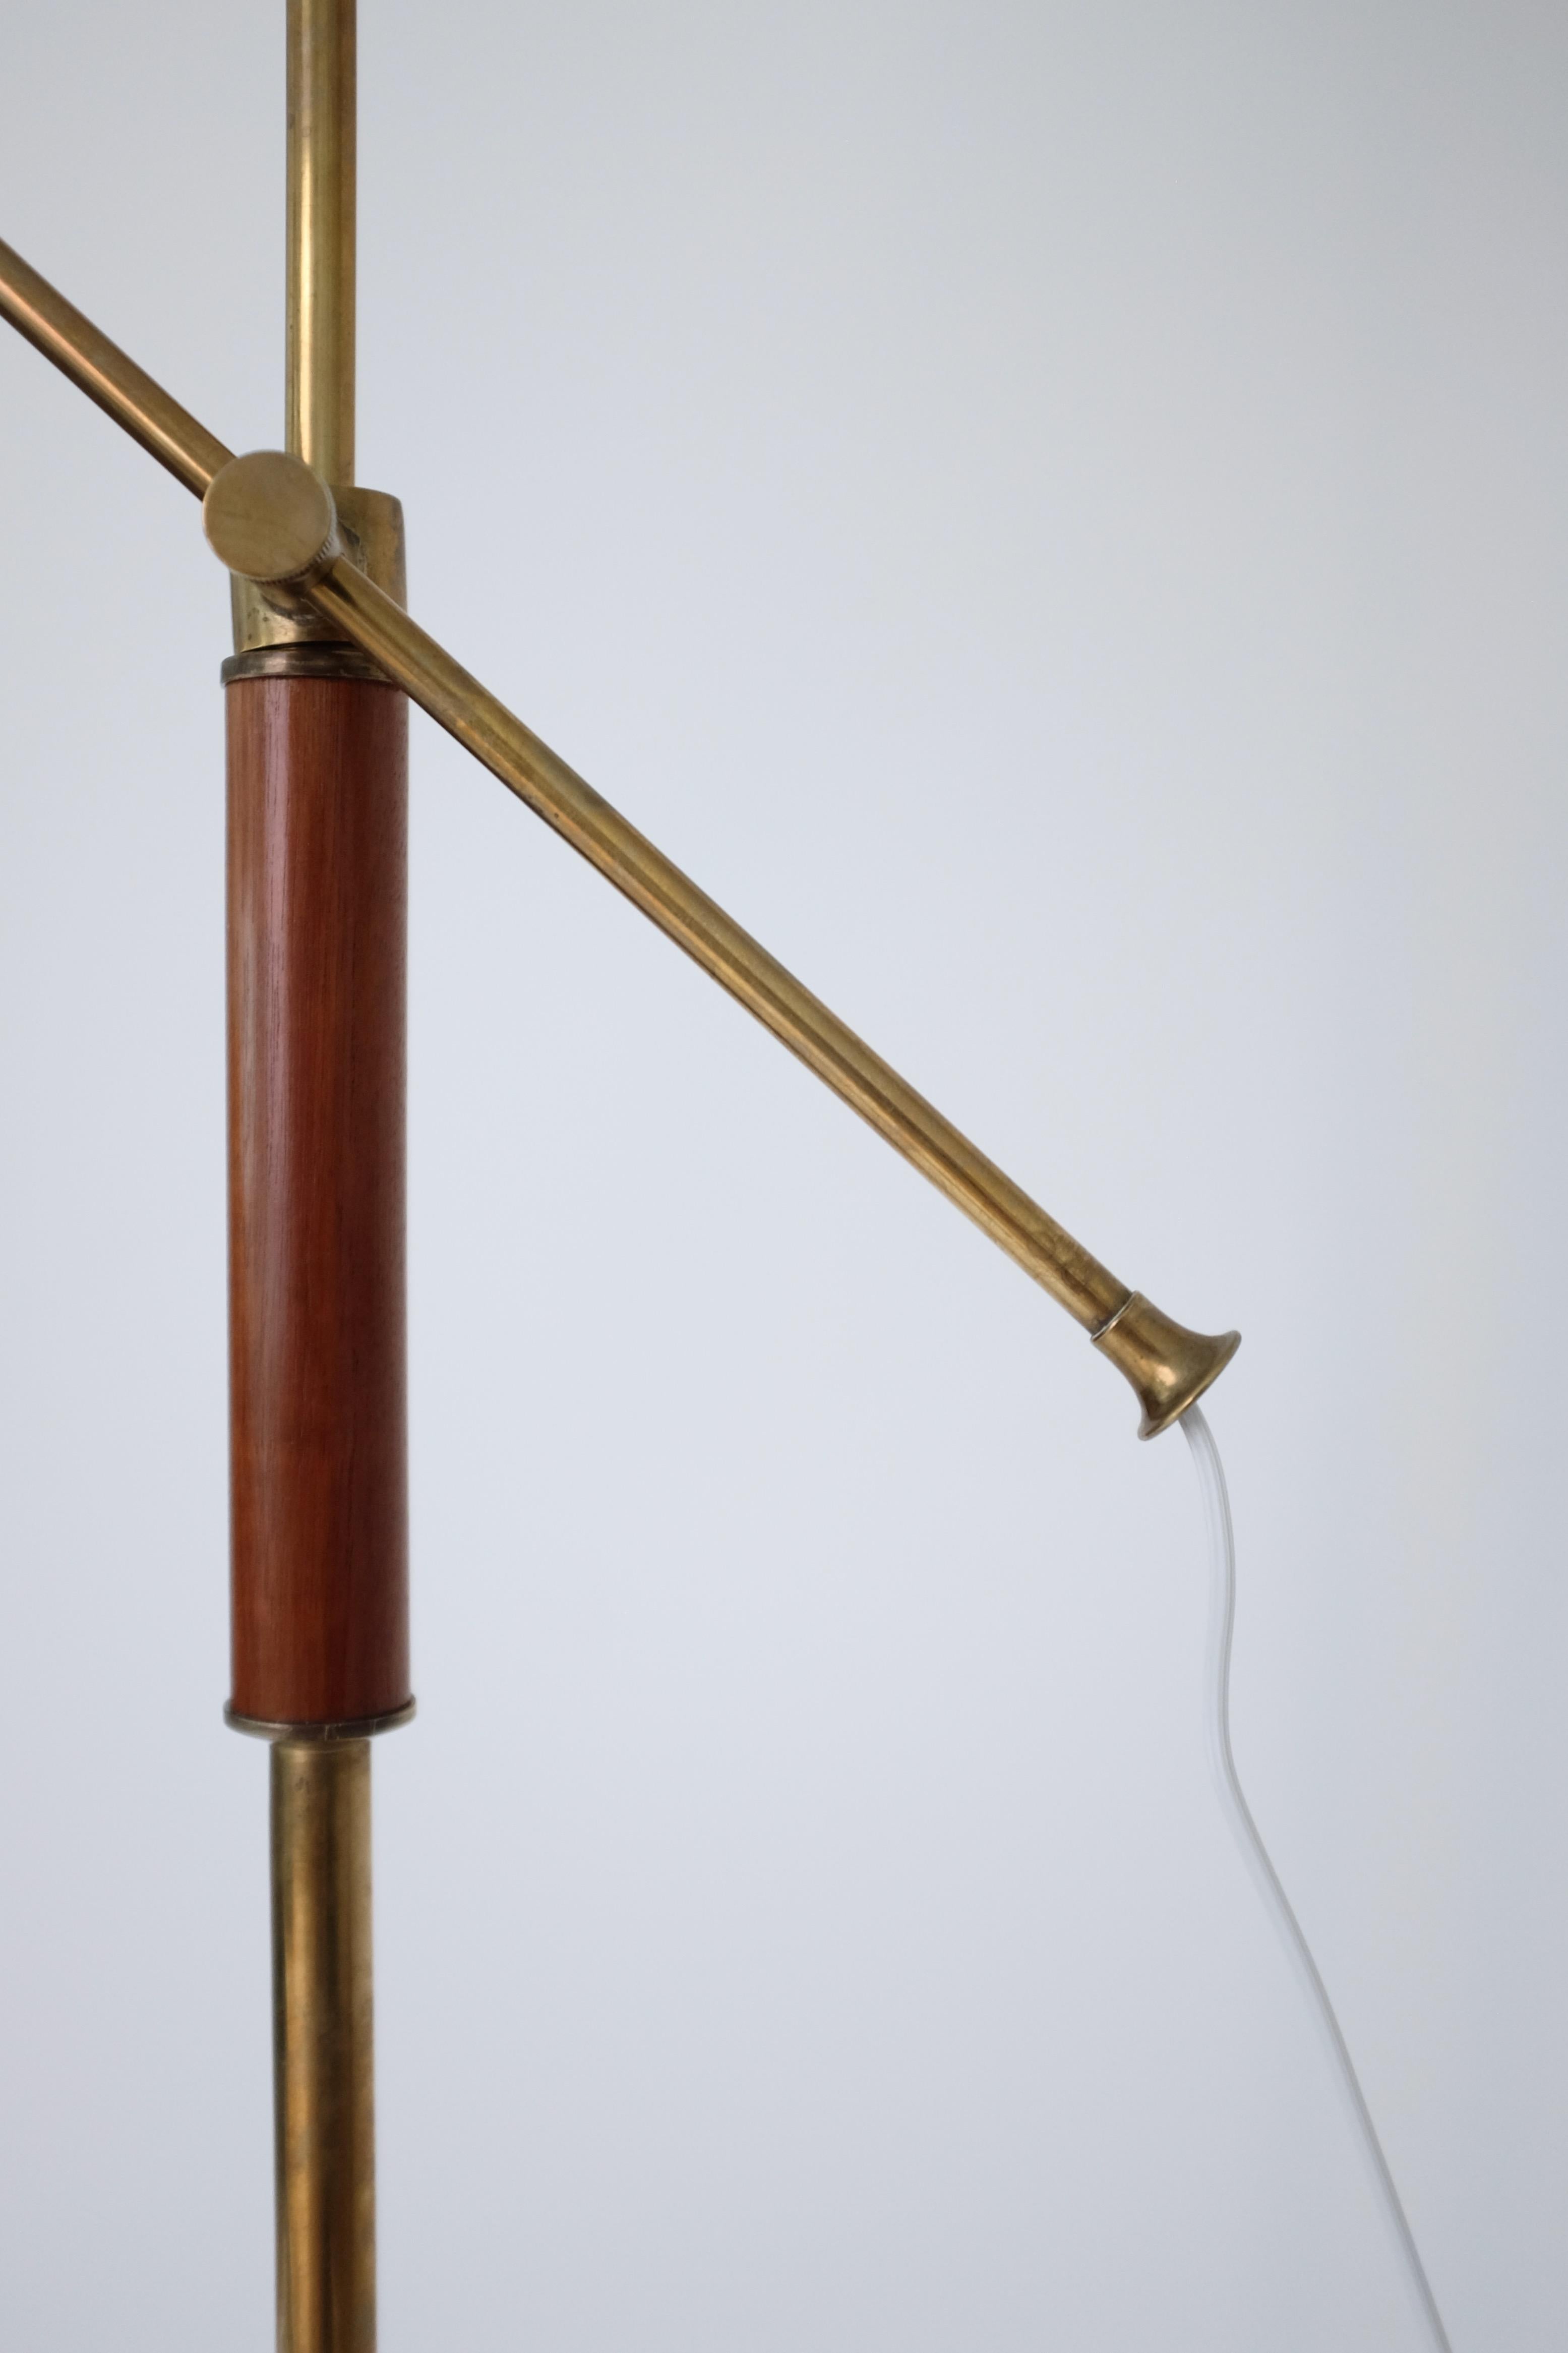 1950's, Brass and Wood Floor Lamp by Bertil Brisborg for Nordiska Kompaniet In Good Condition For Sale In Brooklyn, NY